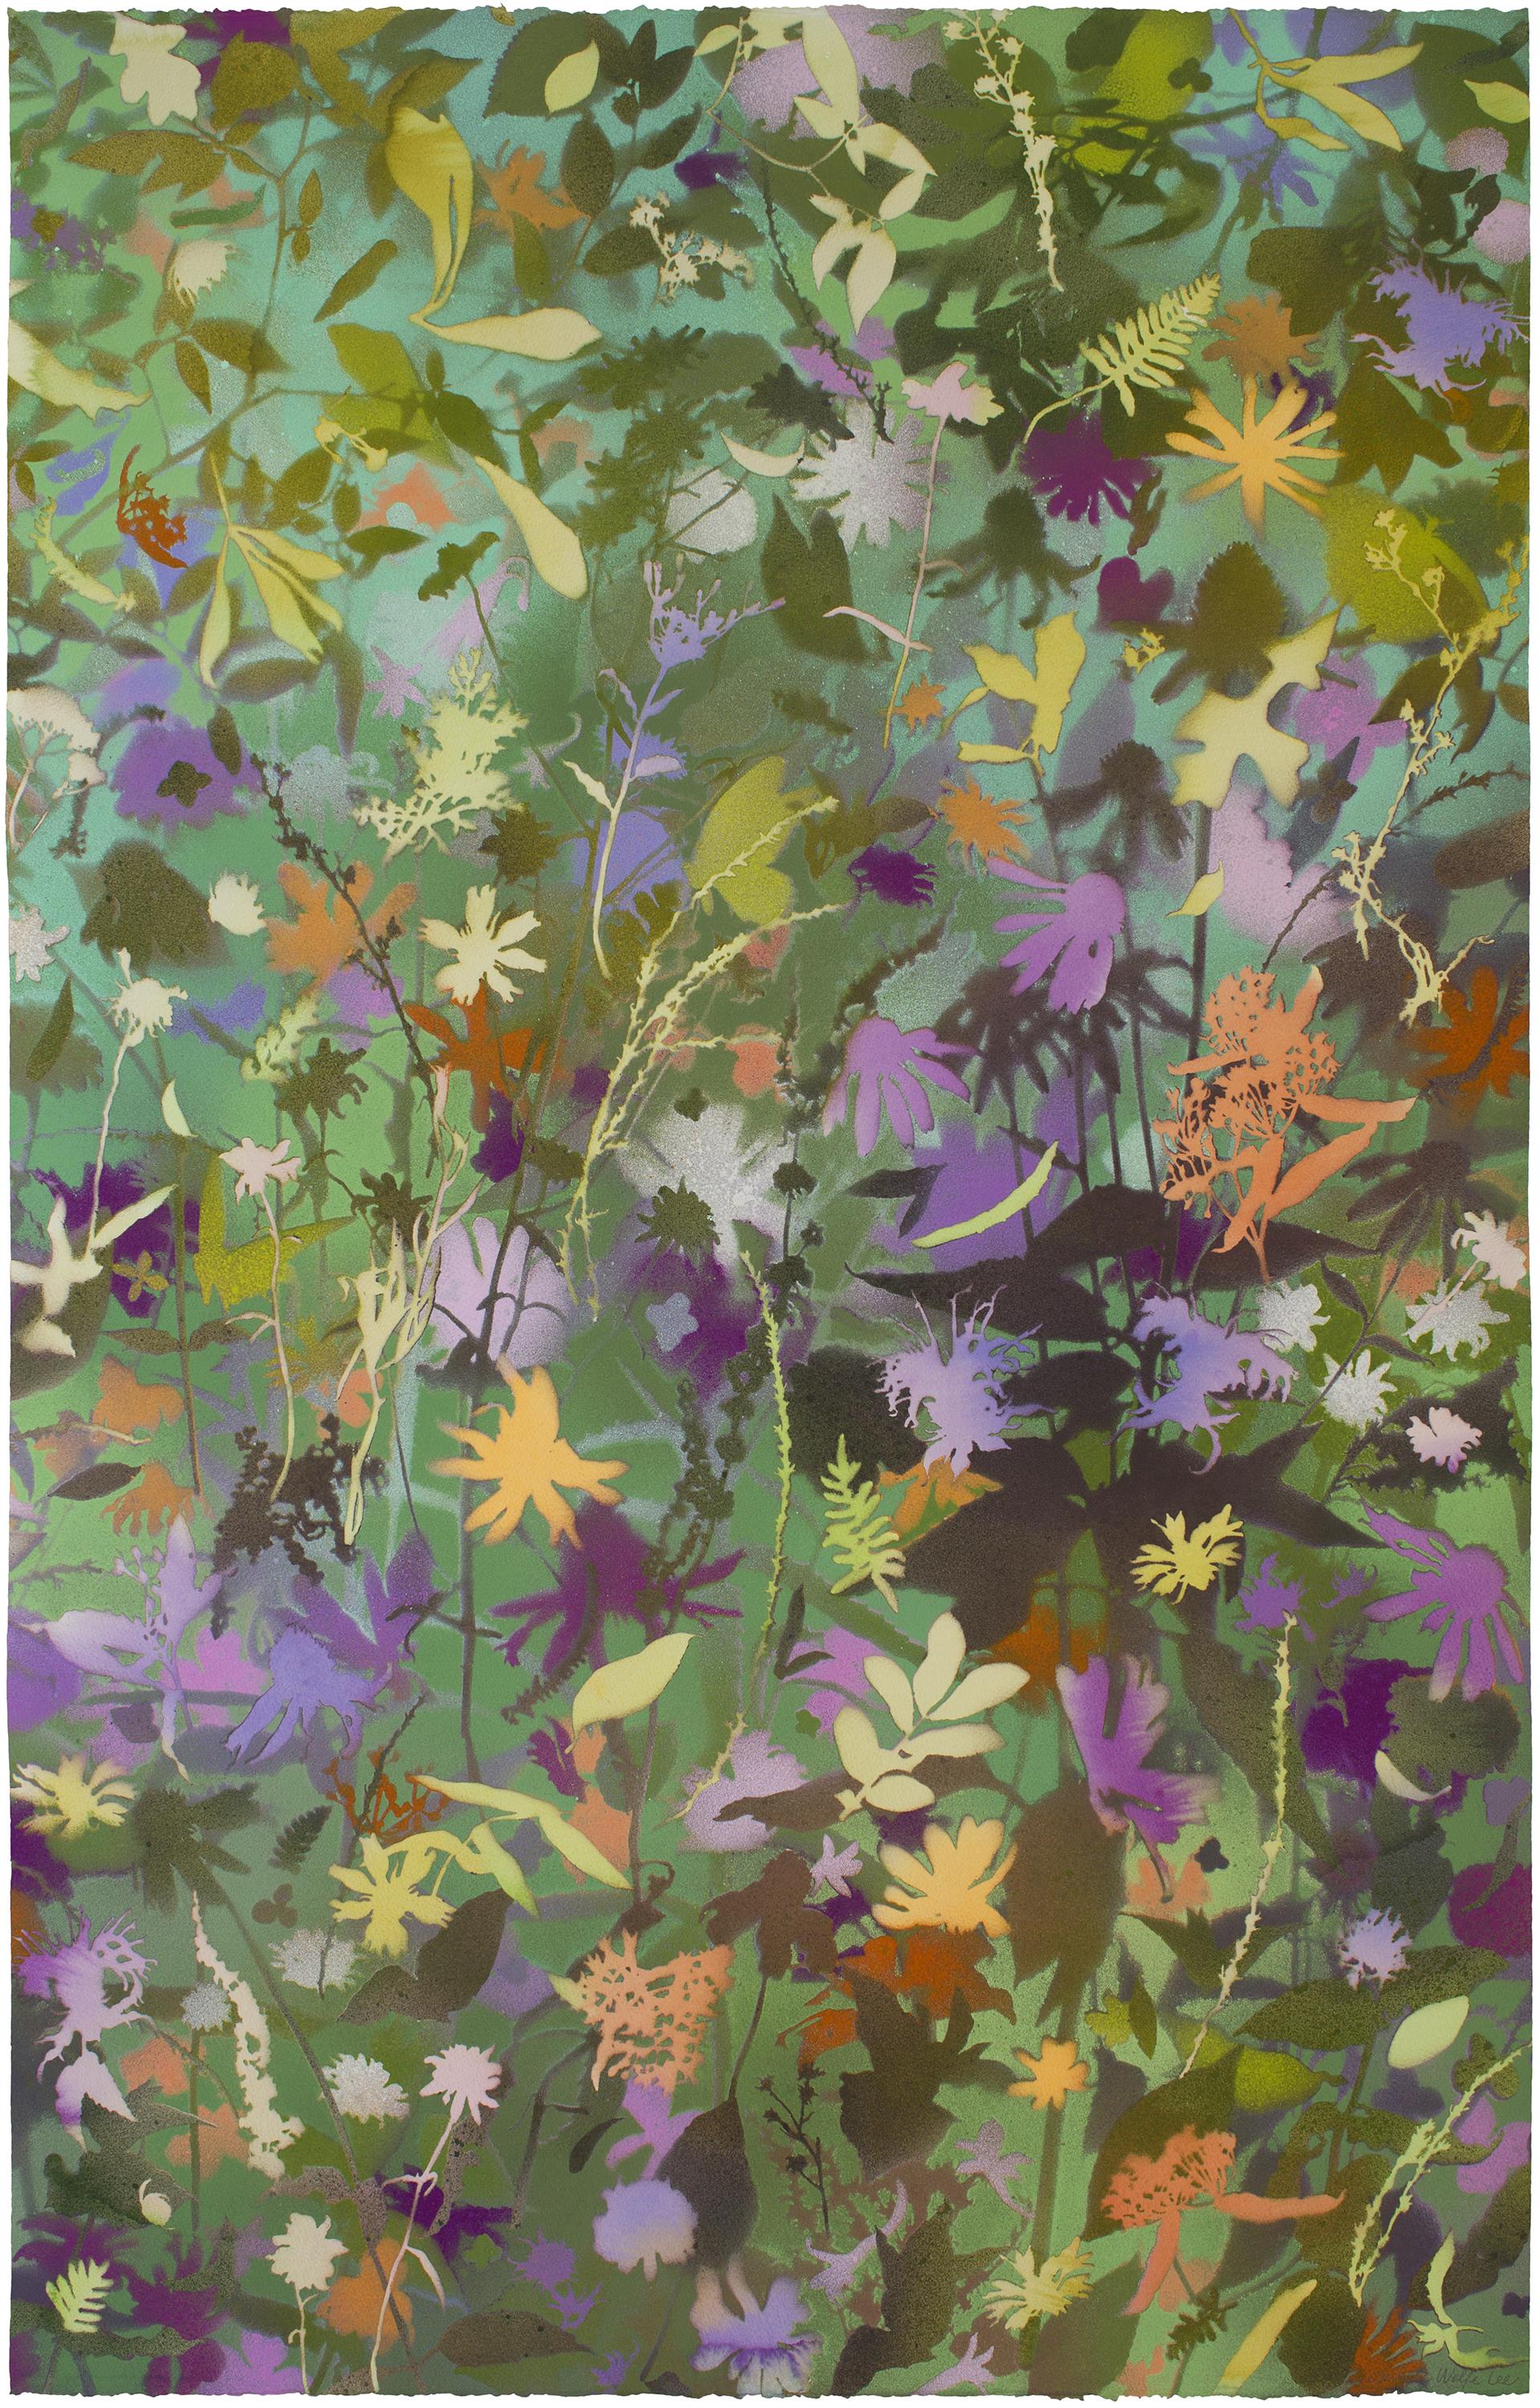 Carlyle Wolfe Lee Landscape Painting - 'Anniversary Wildflowers II'  naturalist landscape, colorful, botanical, layered